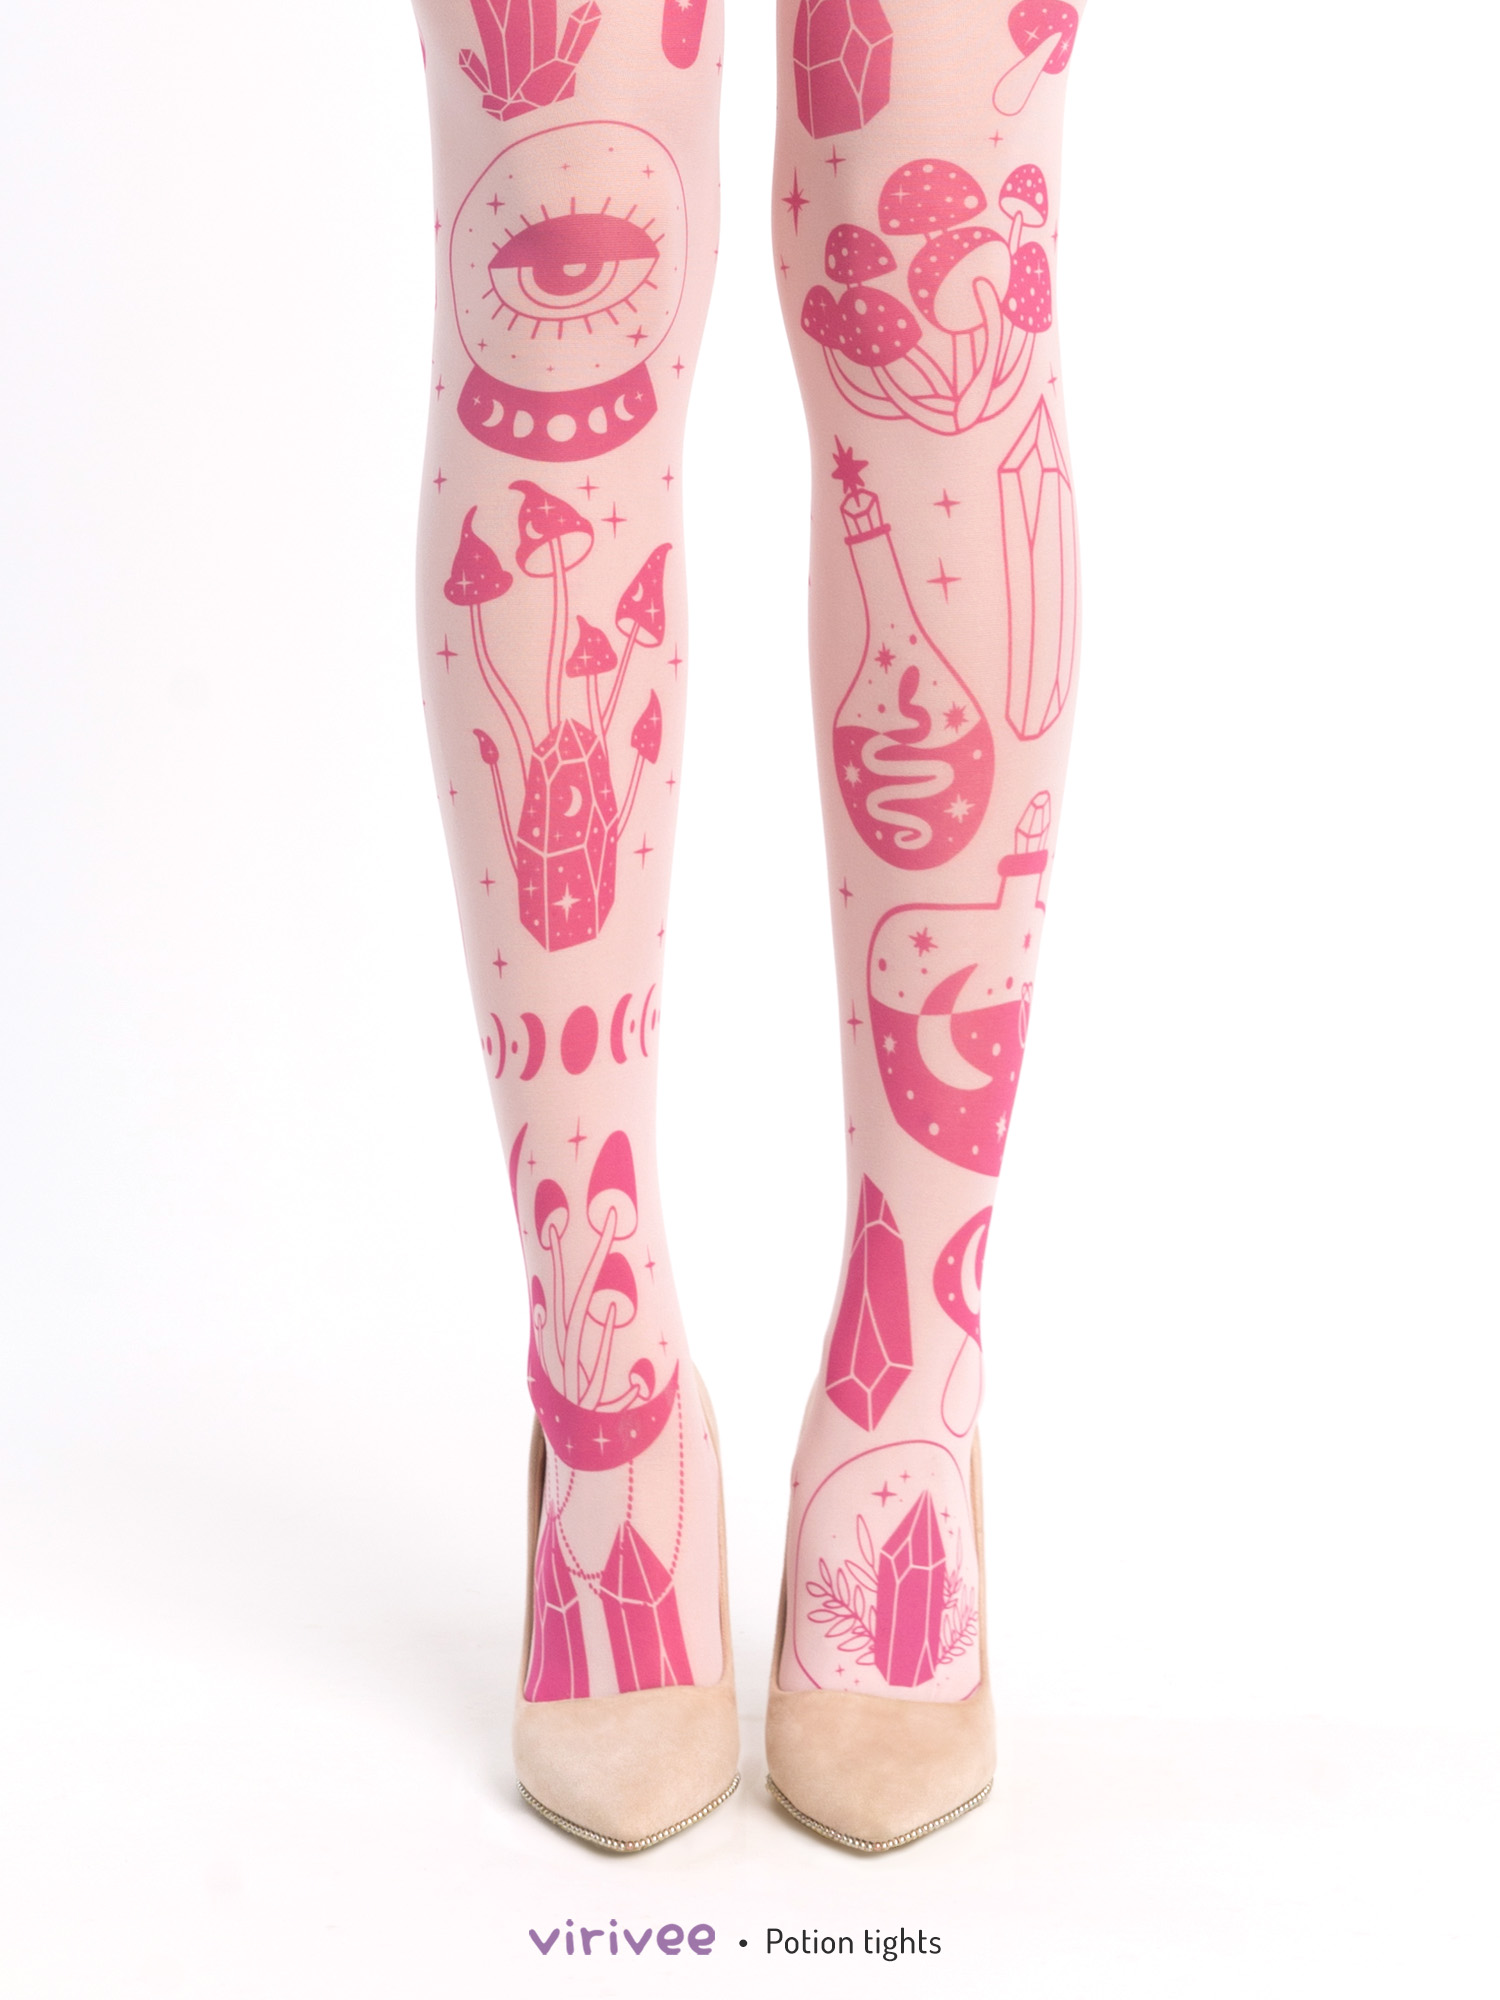 Mushroom and potion gothic tights, pink